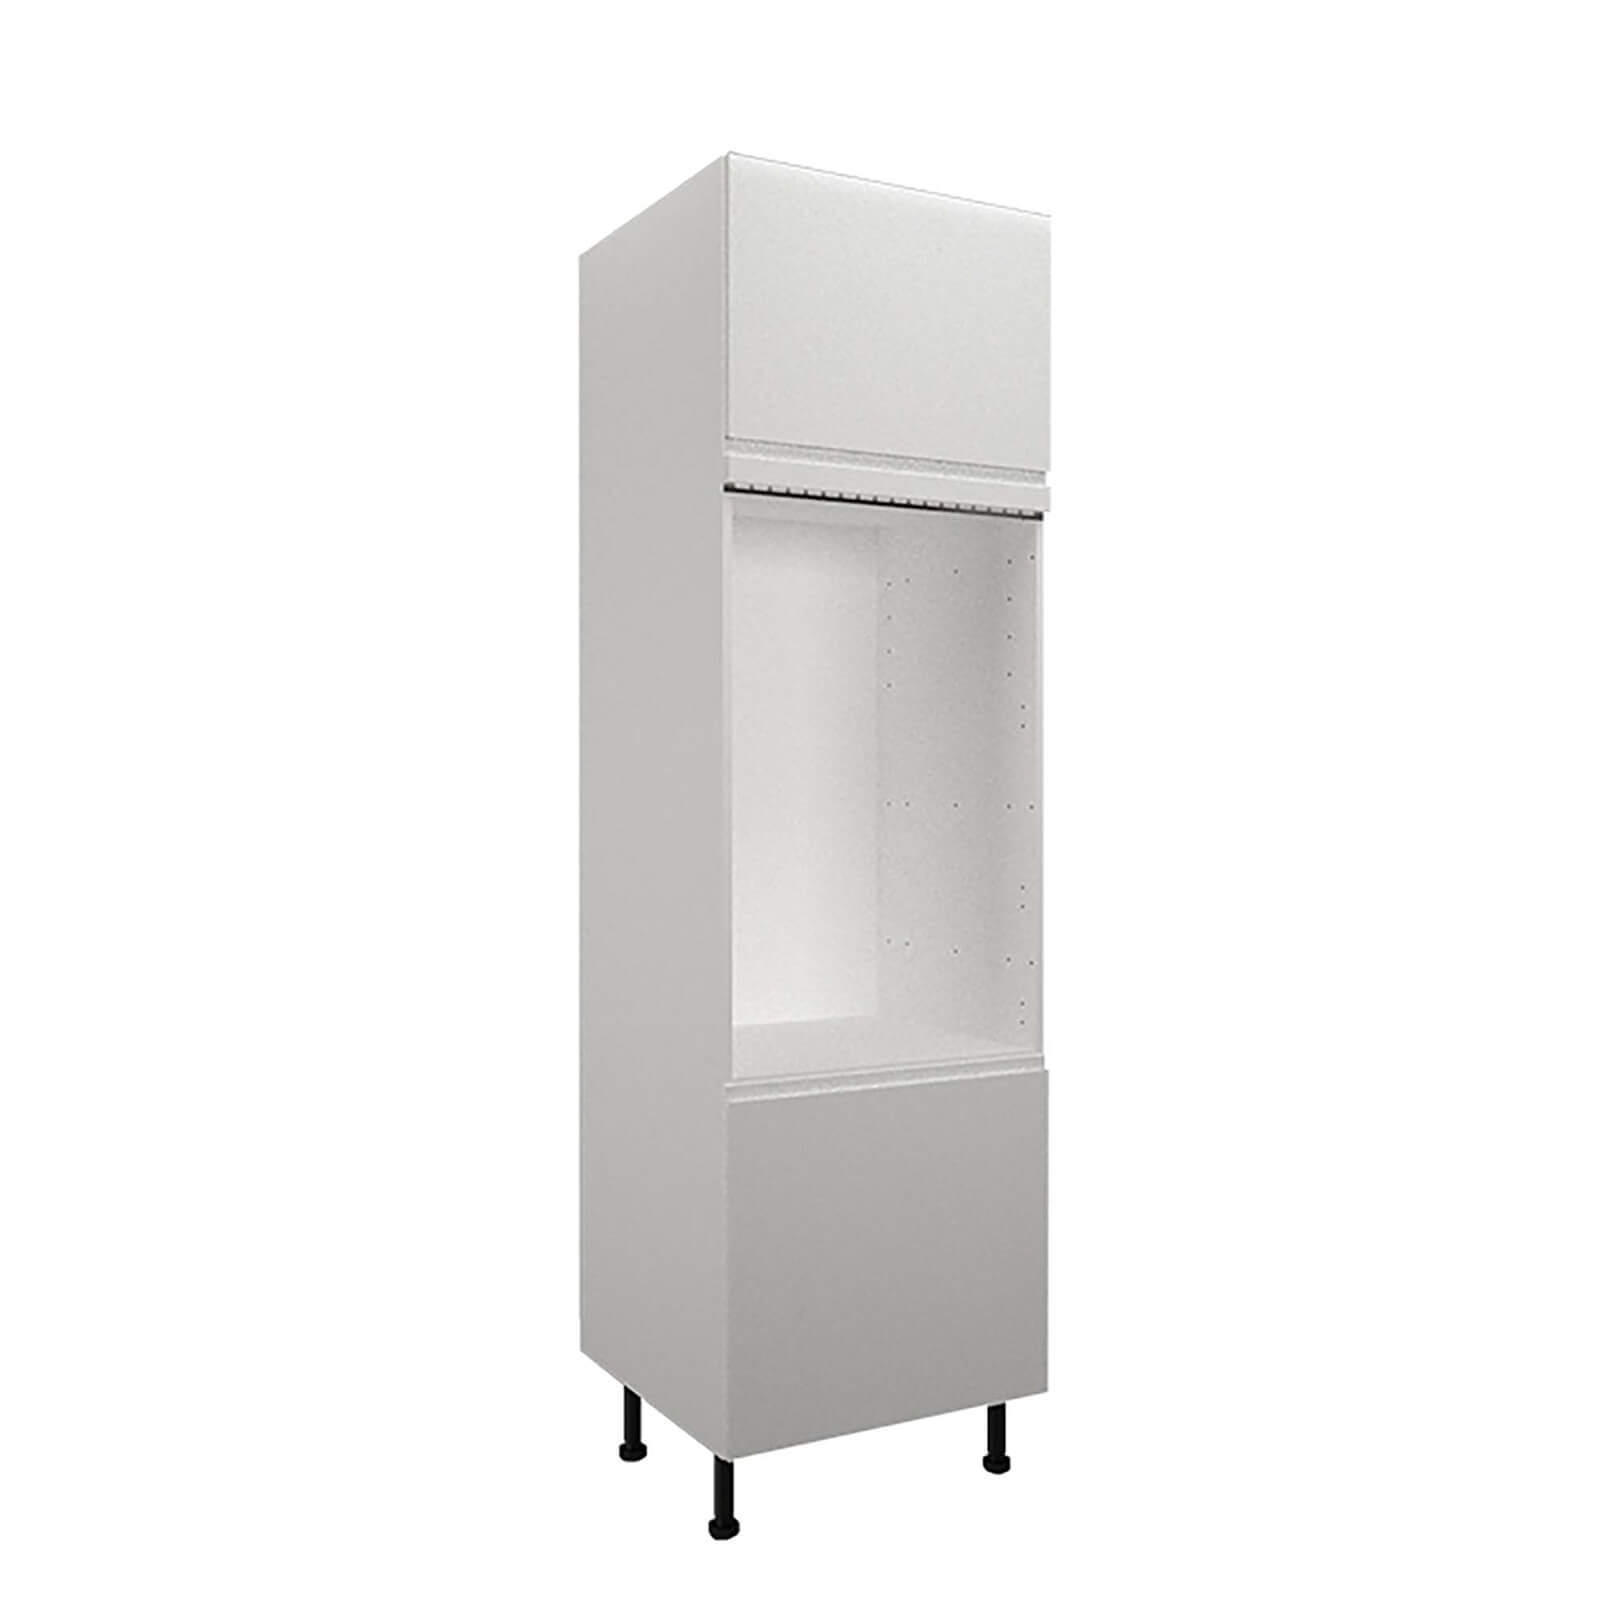 Handleless White Gloss Double Oven Tower Unit